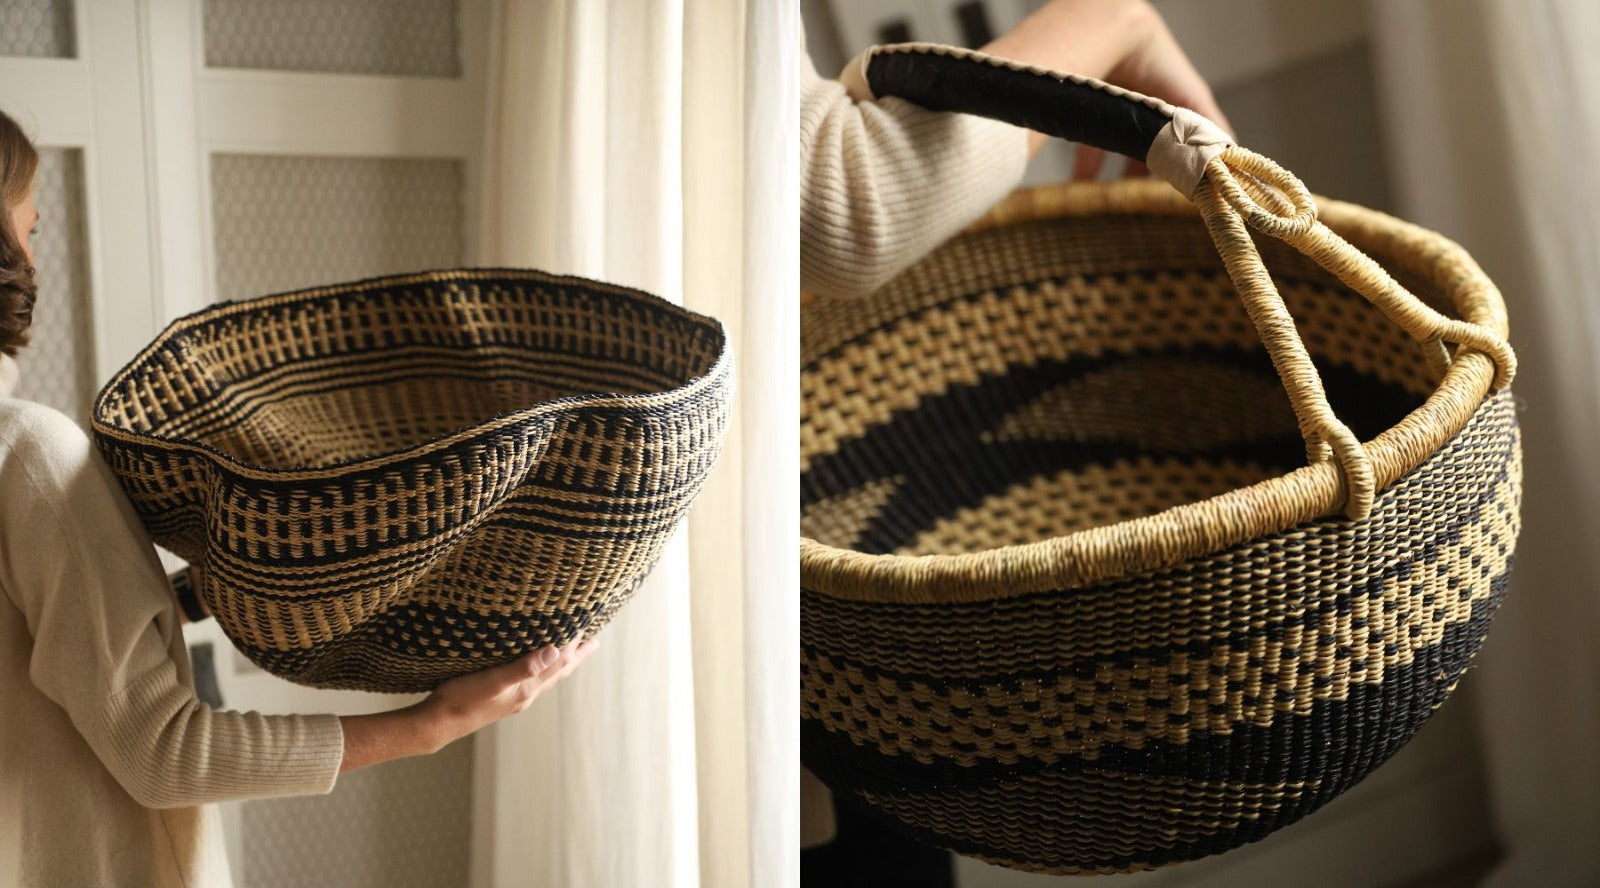 From South America to Your Home: the RIO NEGRO baskets